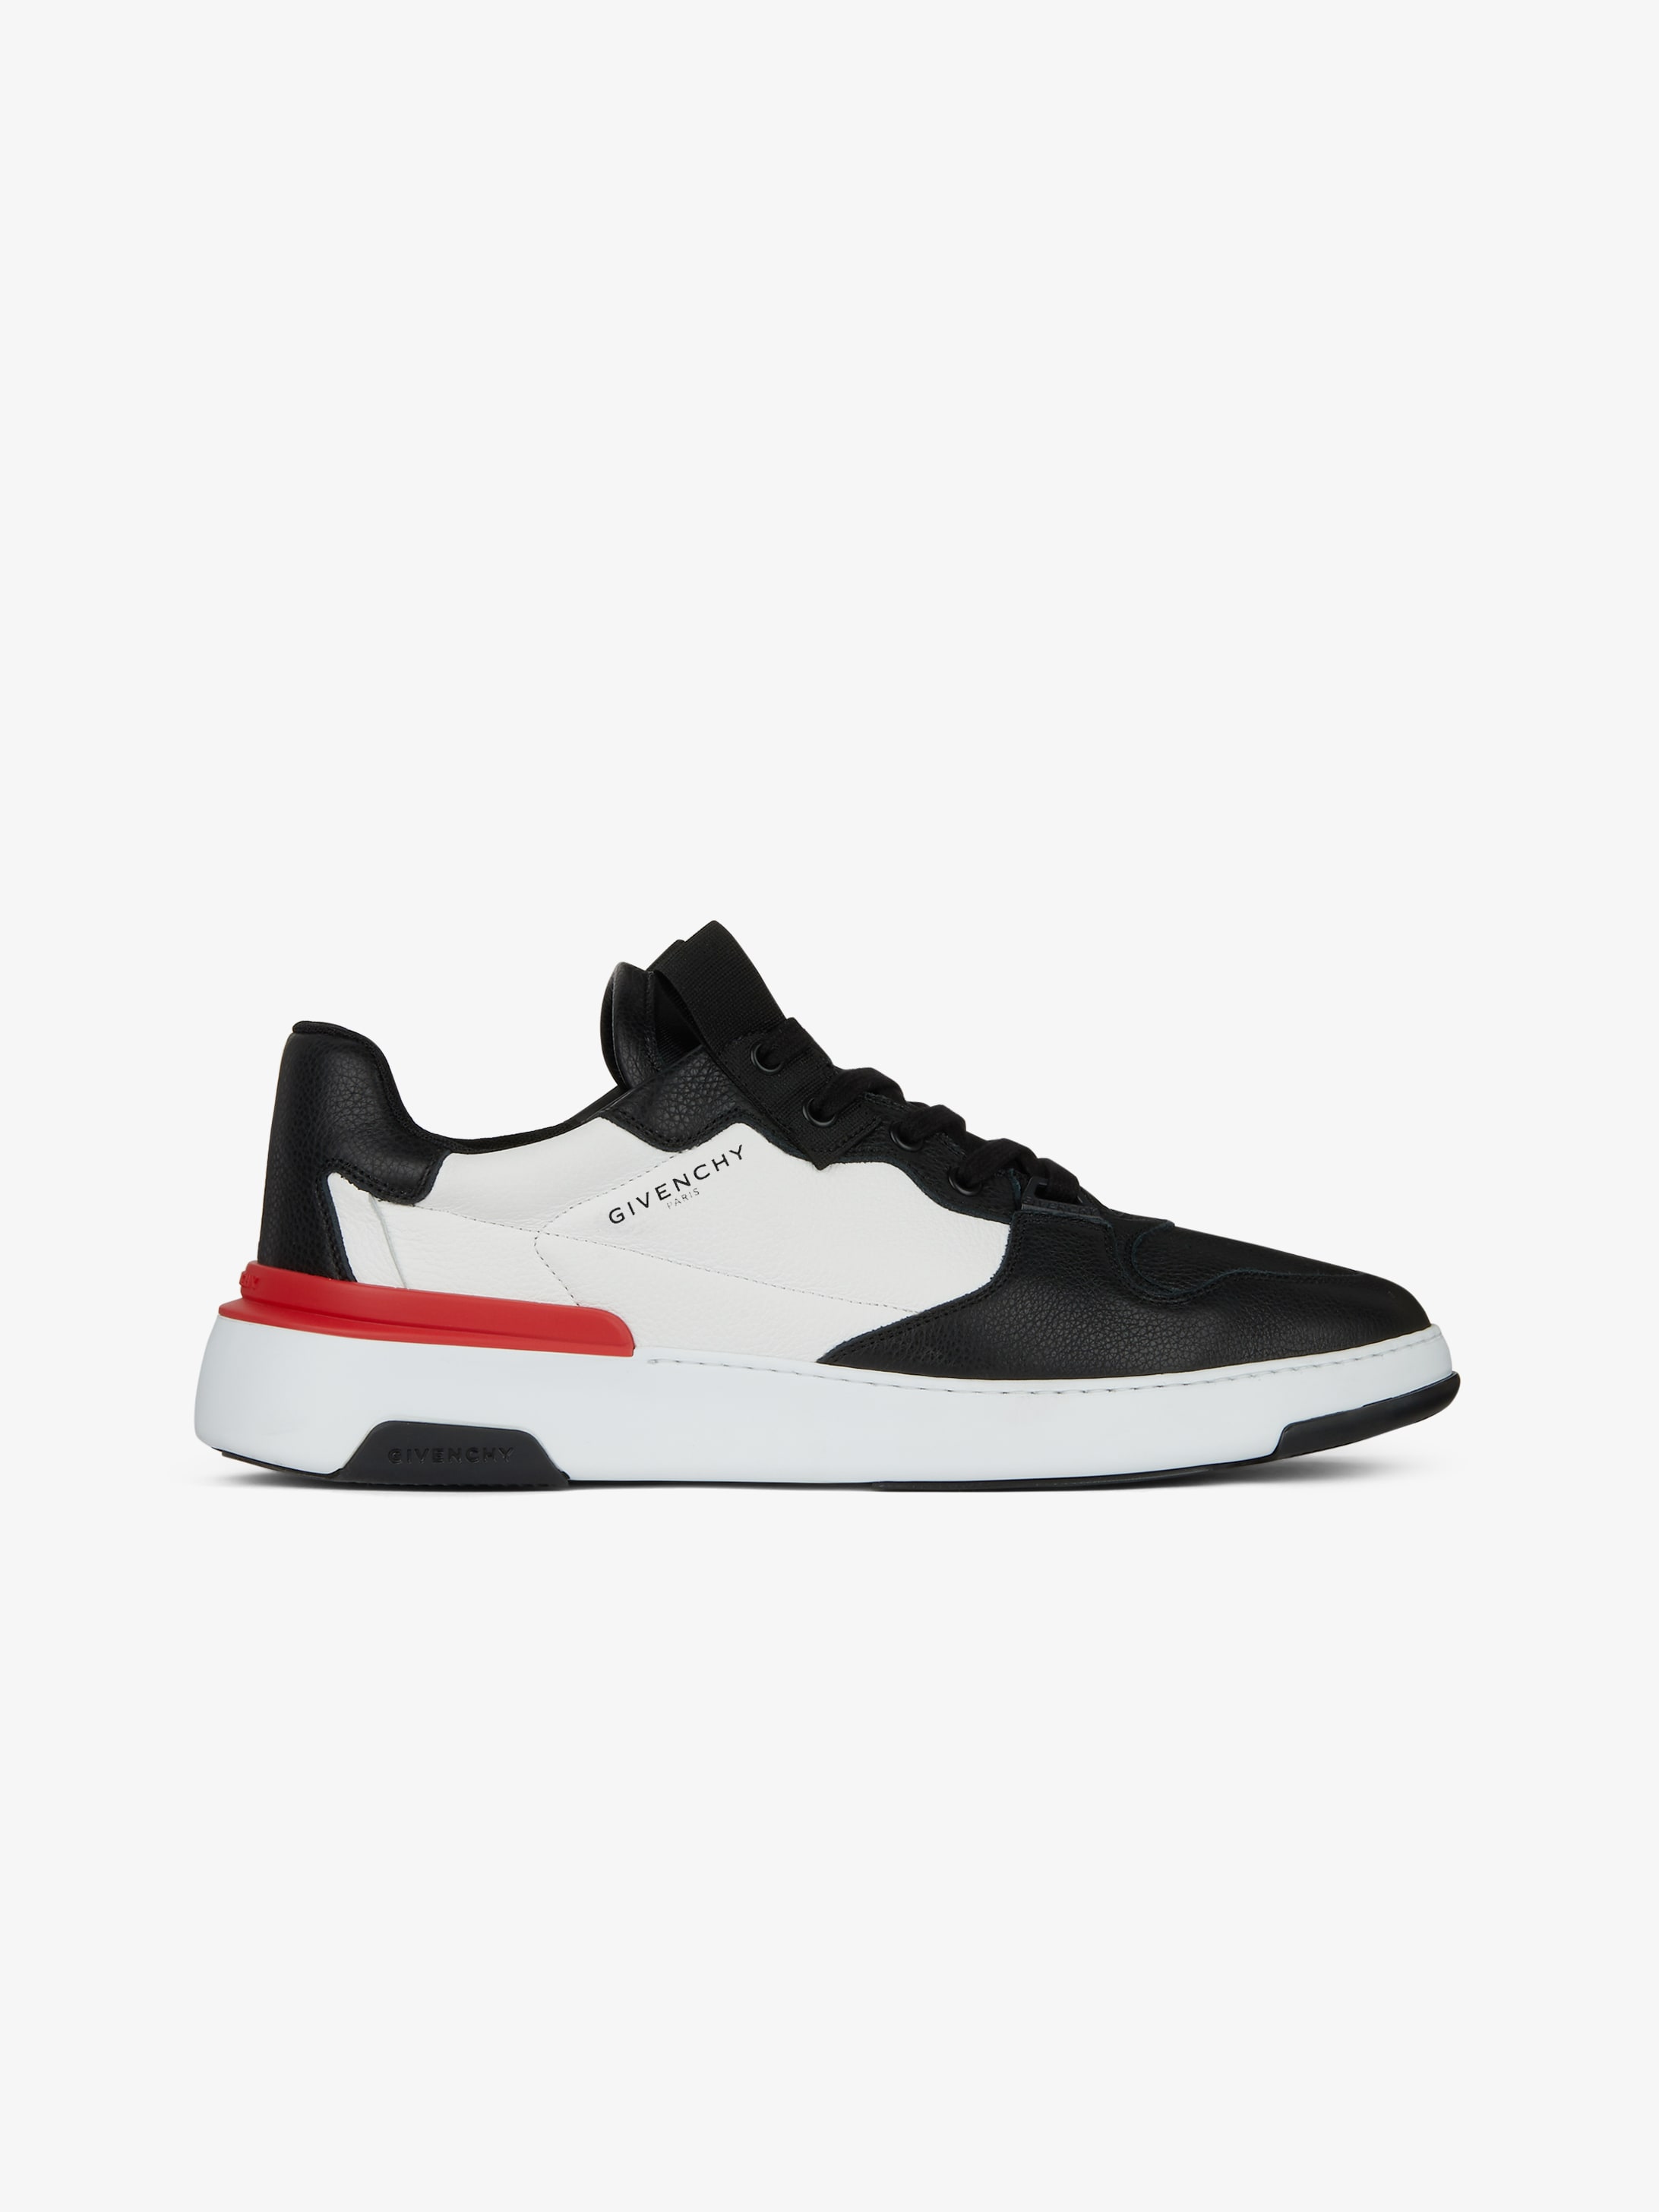 givenchy low sneakers